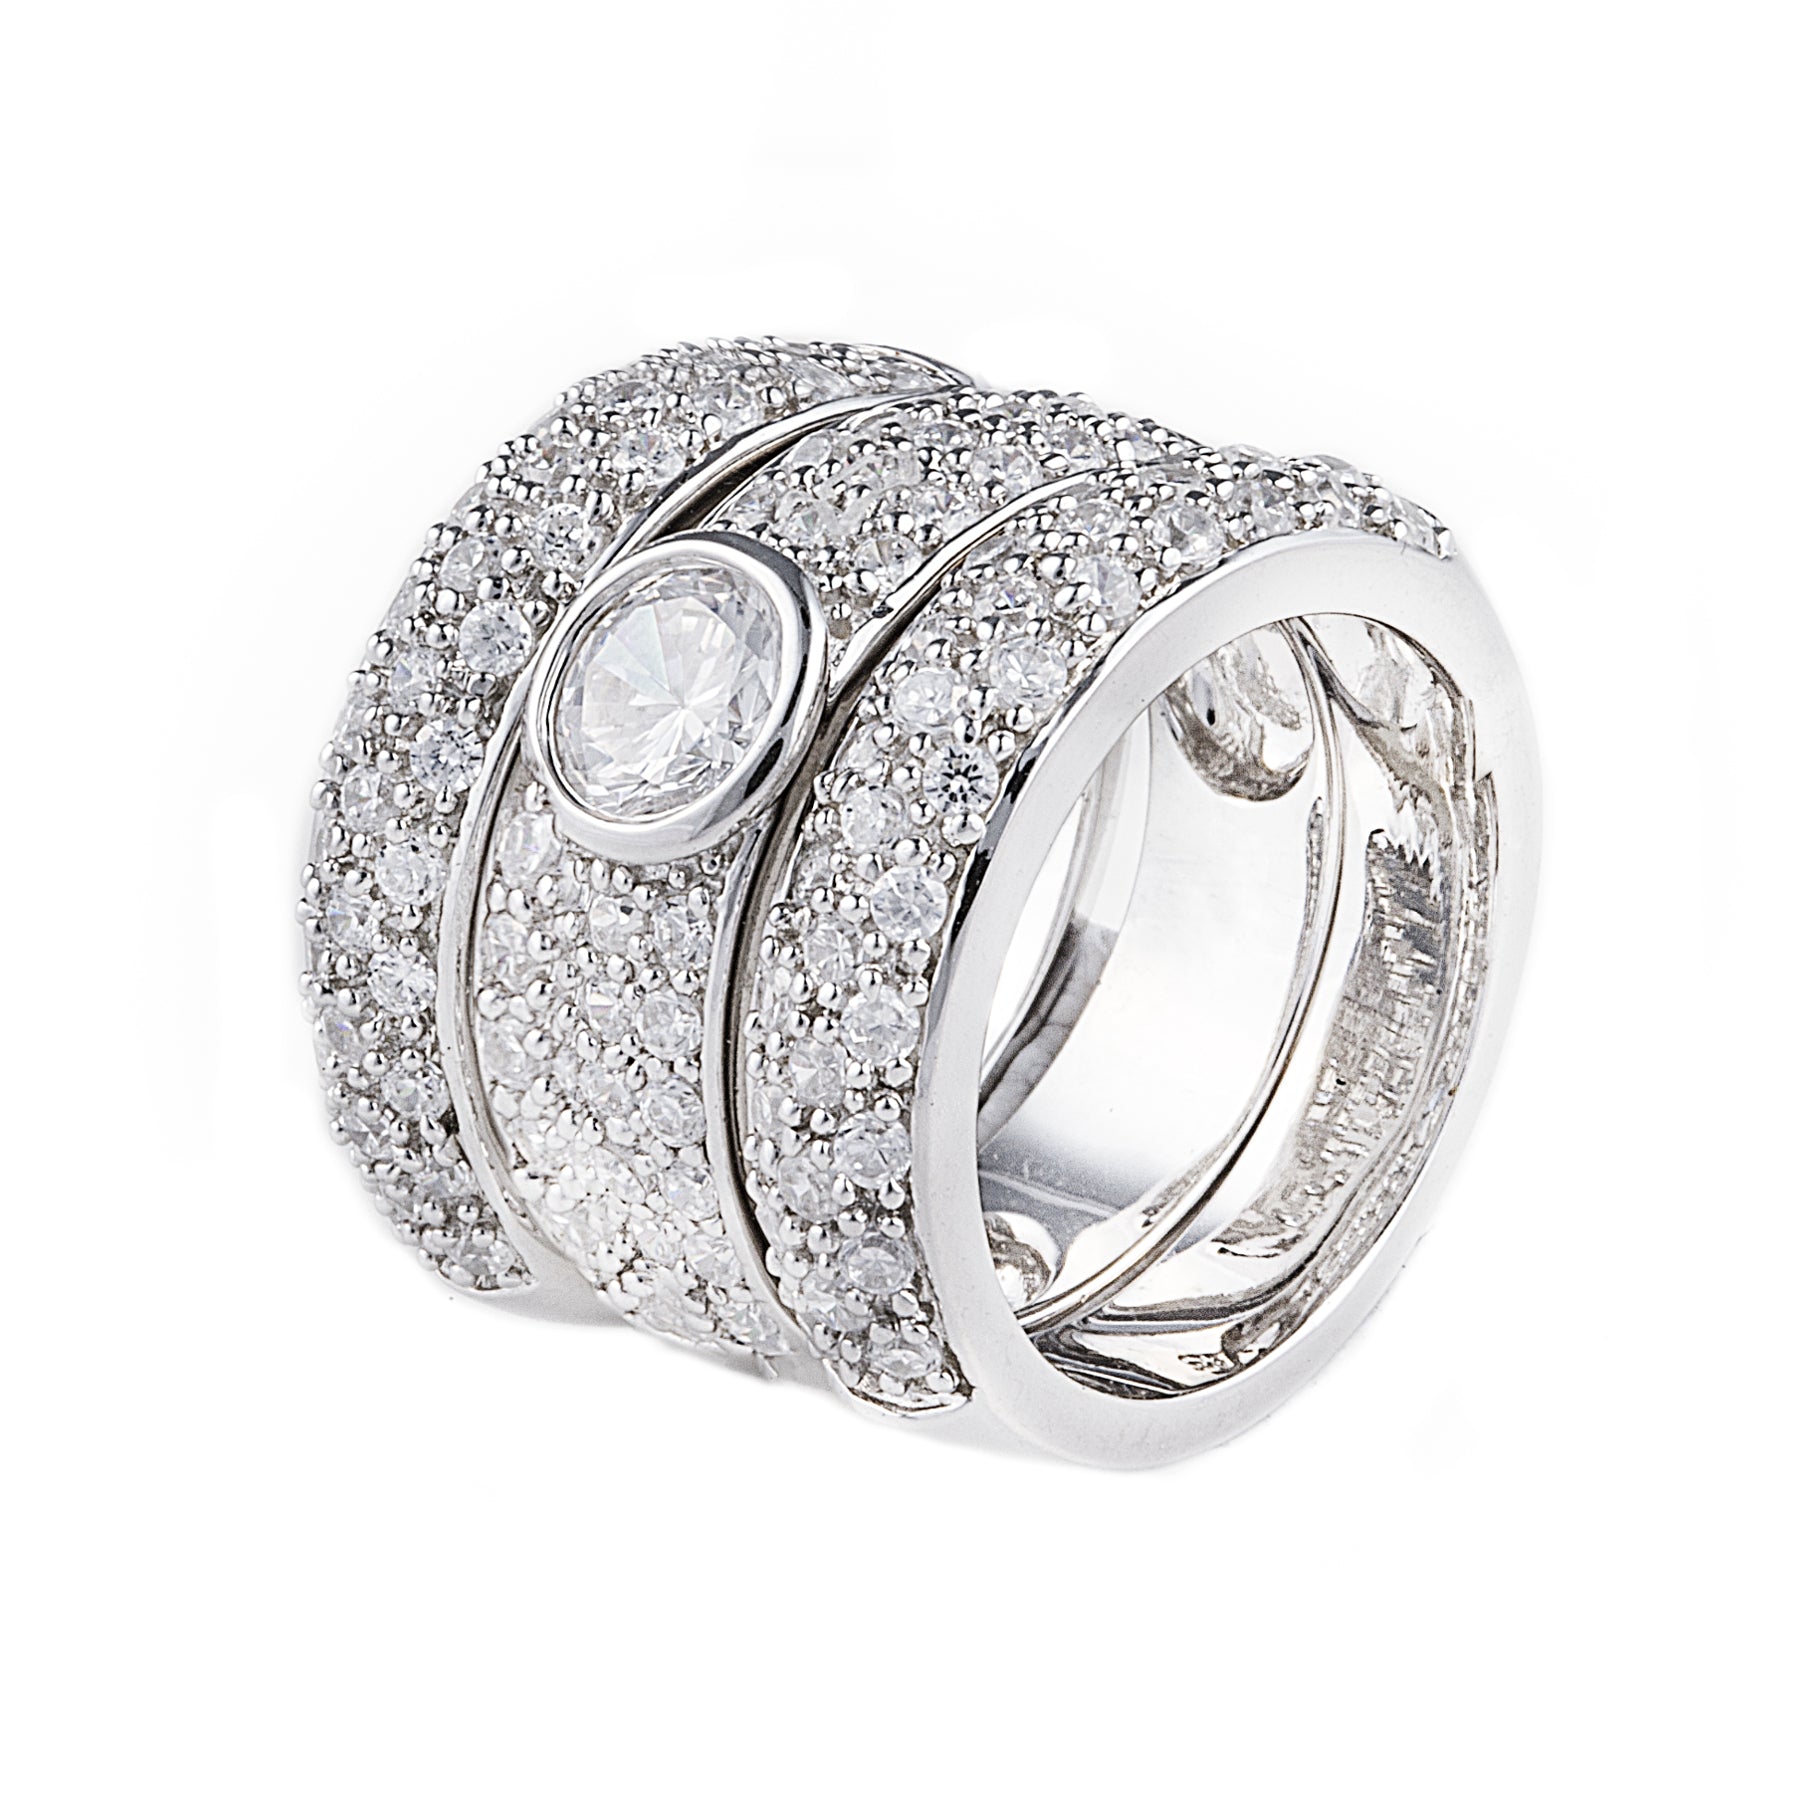 Angelica Ring has 3 separate bands in 925 sterling silver. Pavé setting with cubic zirconia stones. The centre ring has a large cubic zirconia stone. Shop rings & affordable luxury jewellery by Bellagio & Co. Worldwide shipping